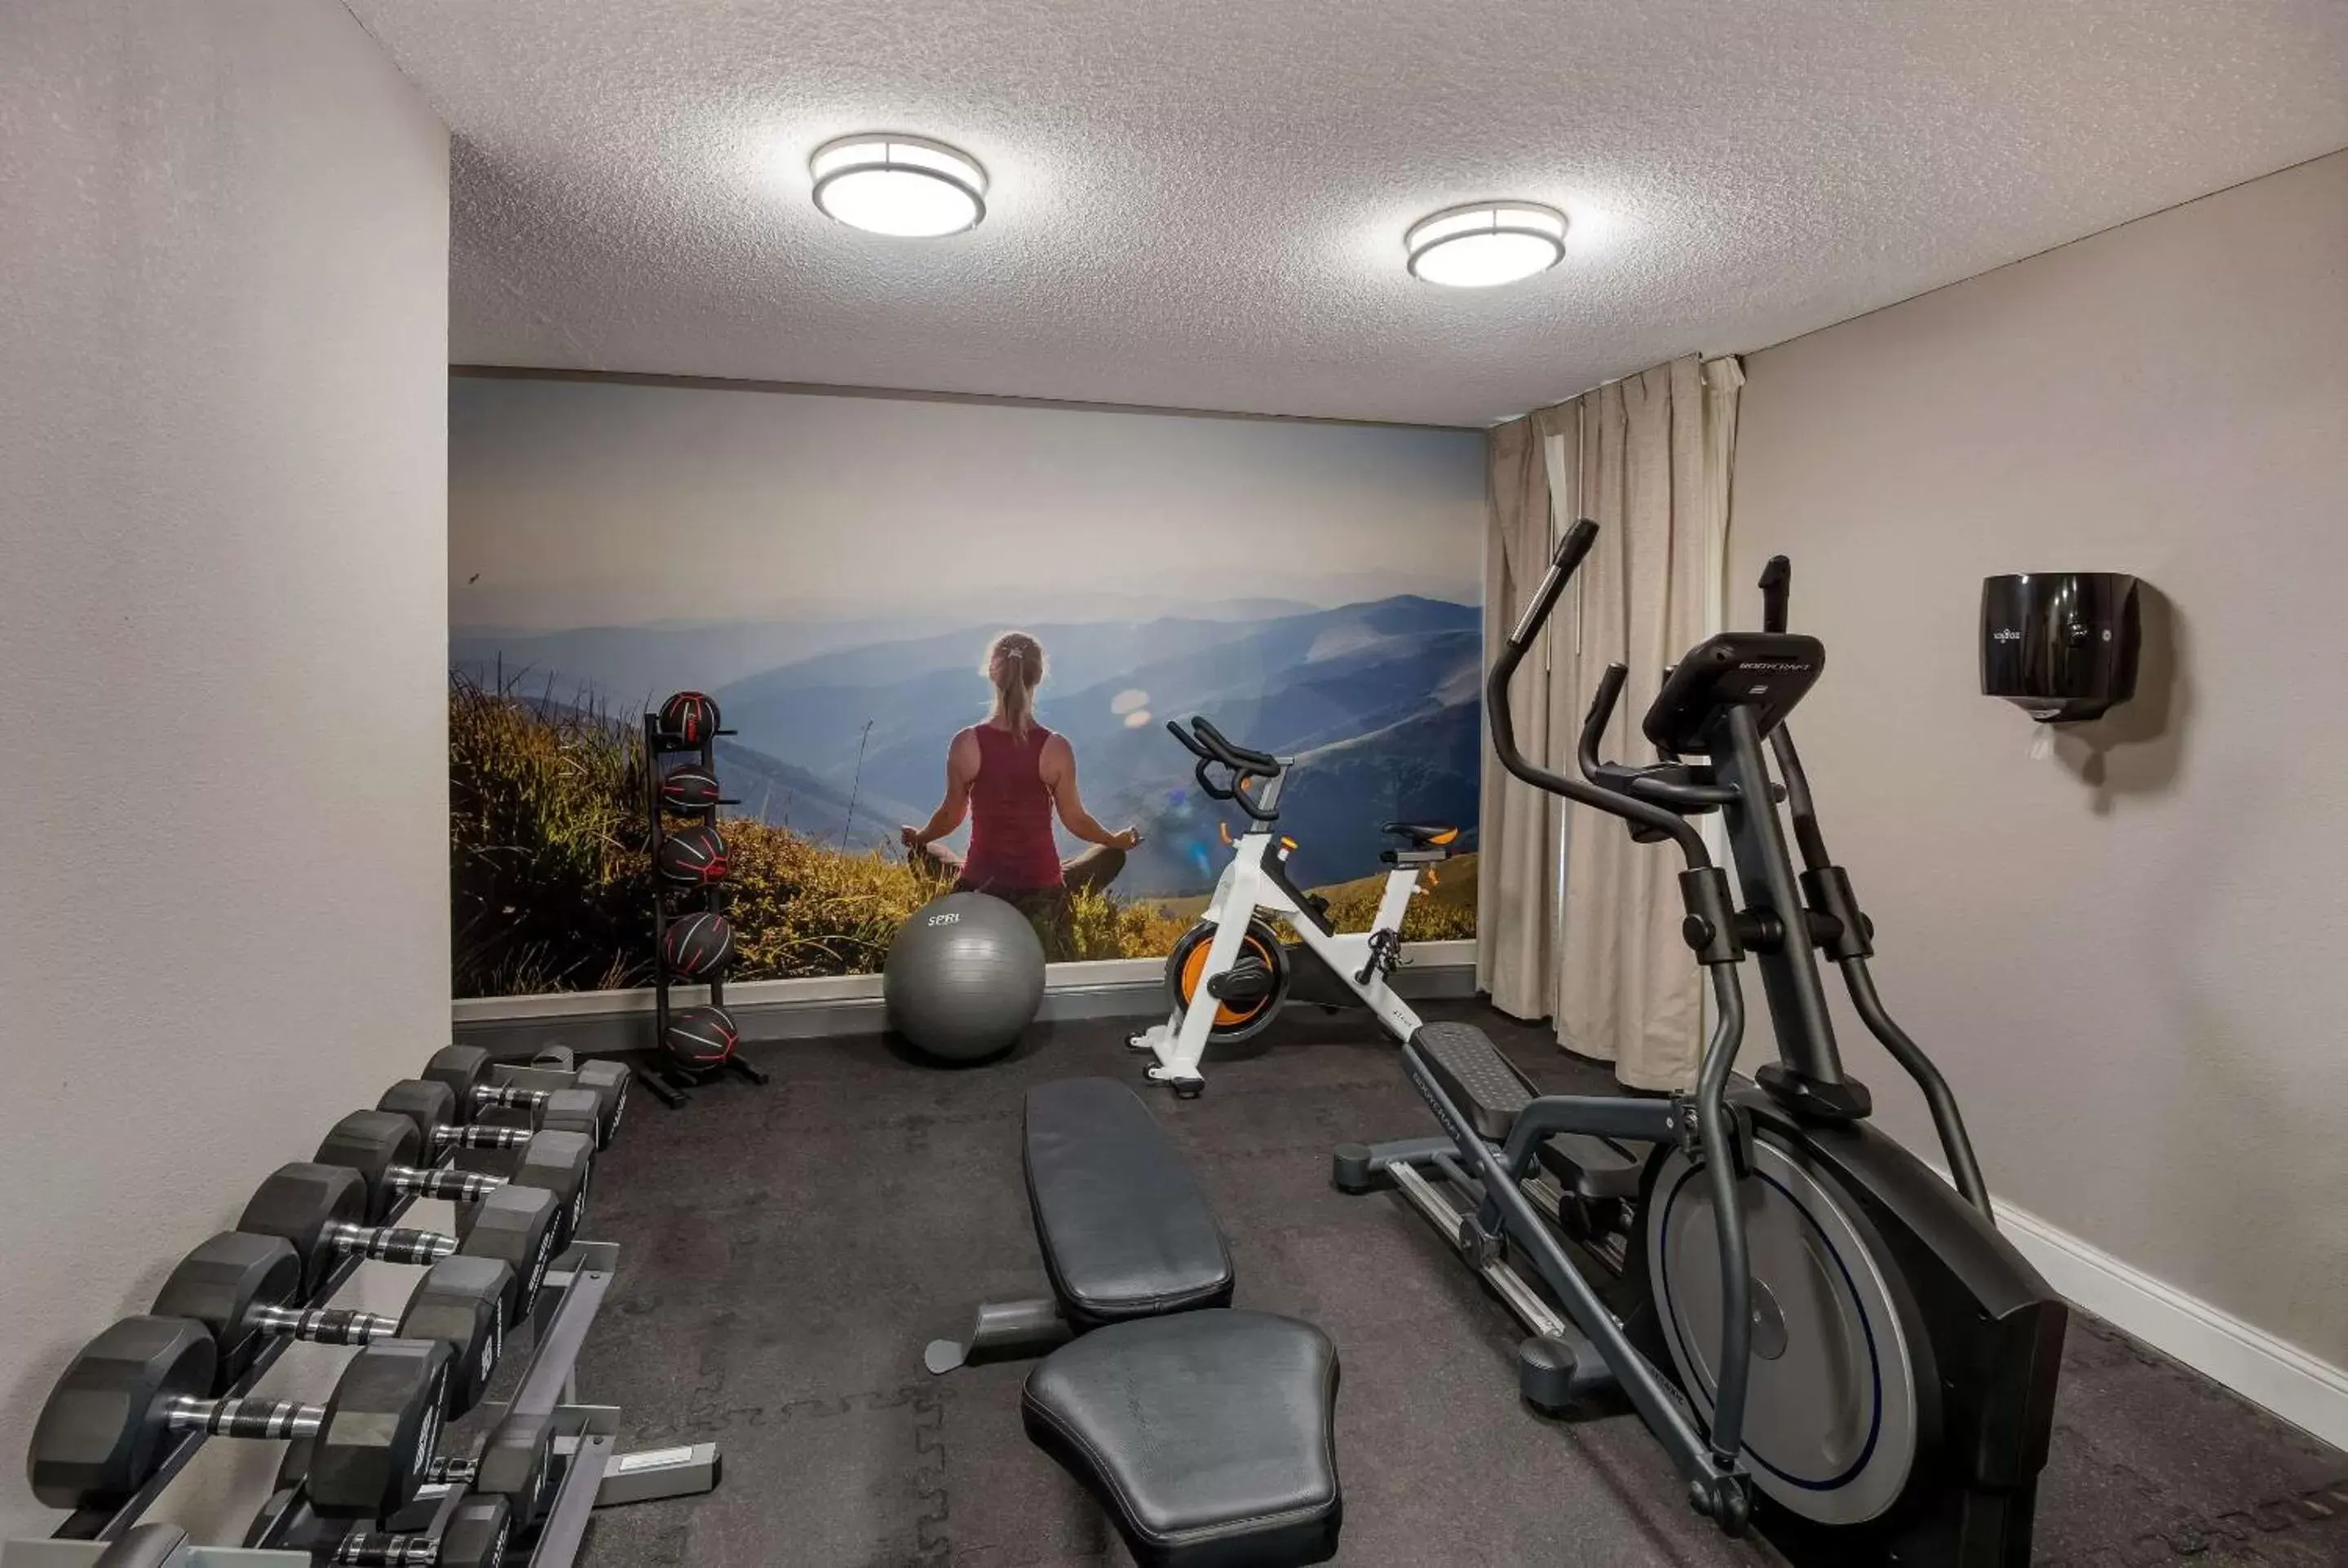 Fitness centre/facilities, Fitness Center/Facilities in Clarion Pointe Indianapolis Northeast